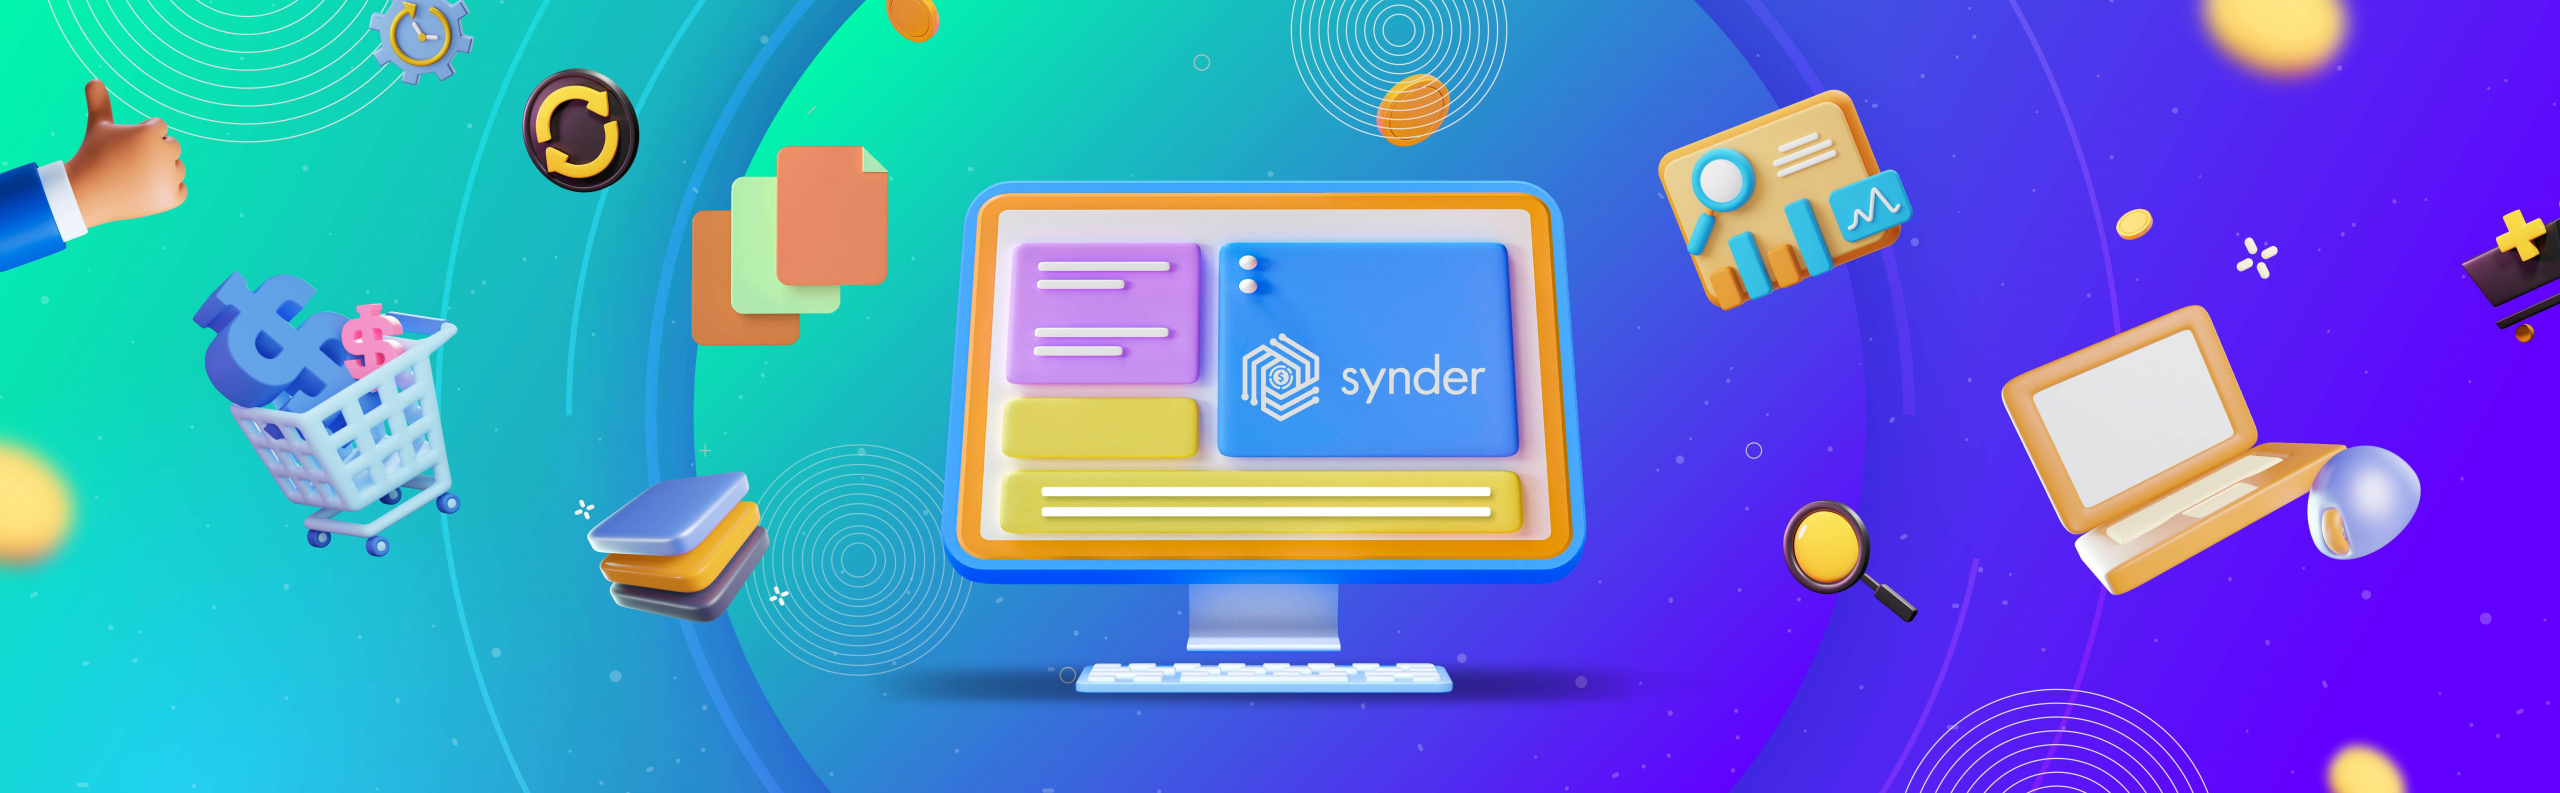 Synder integration with accounting software